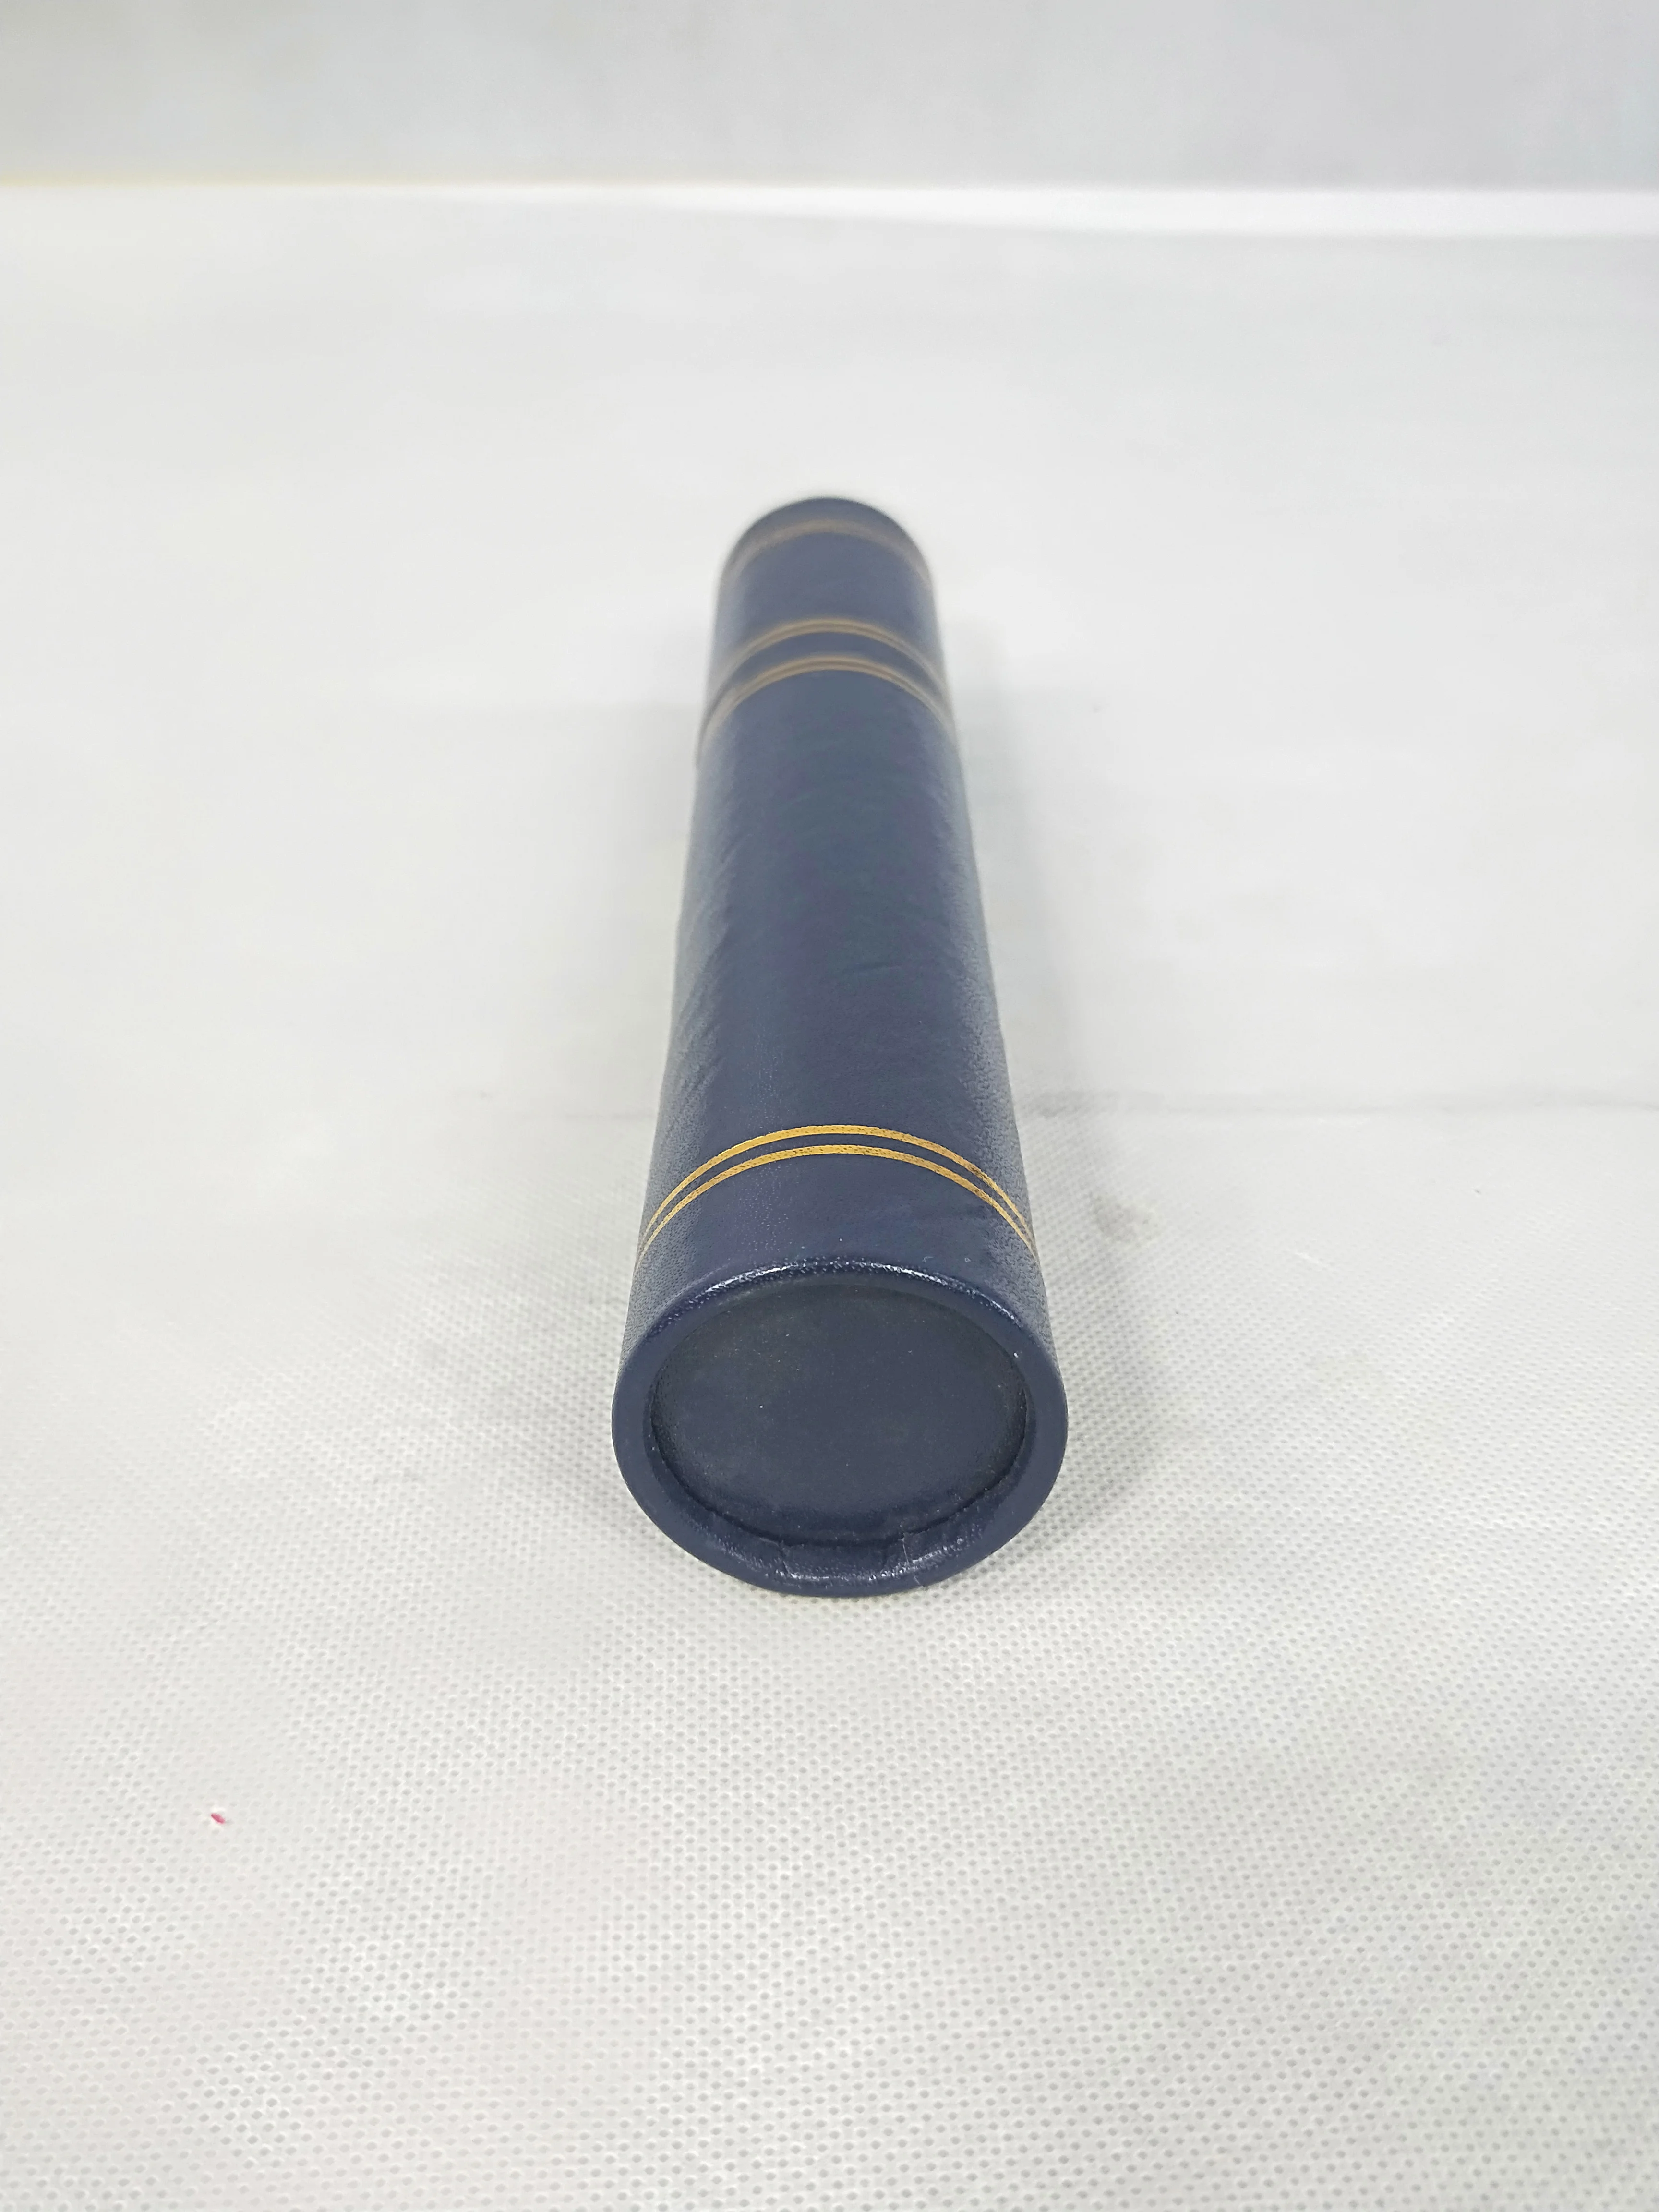 
diploma tube Certificate cylinder for graduation certificate university diploma tube 